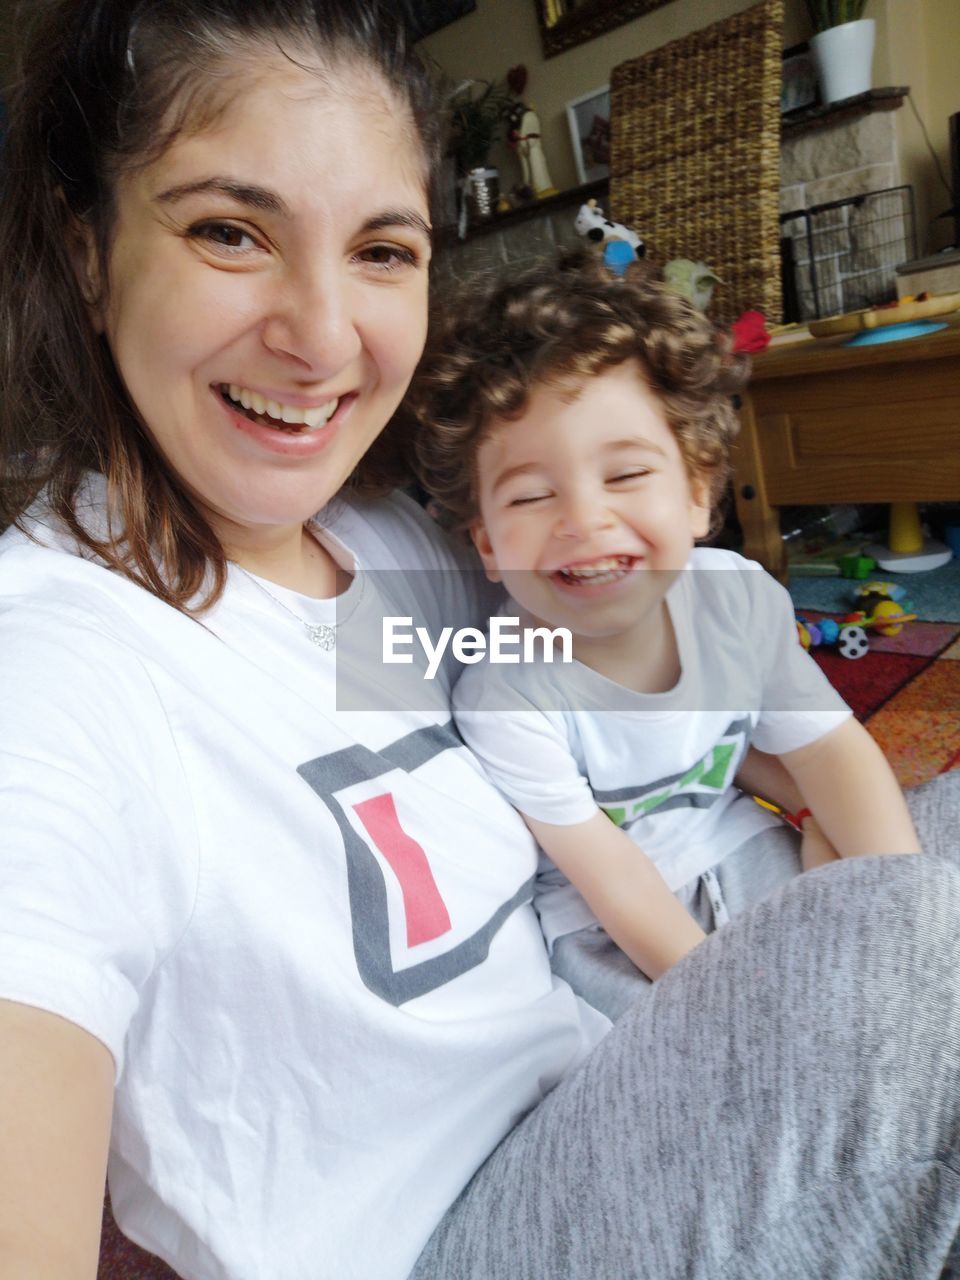 PORTRAIT OF SMILING BOY AND WOMAN AT HOME